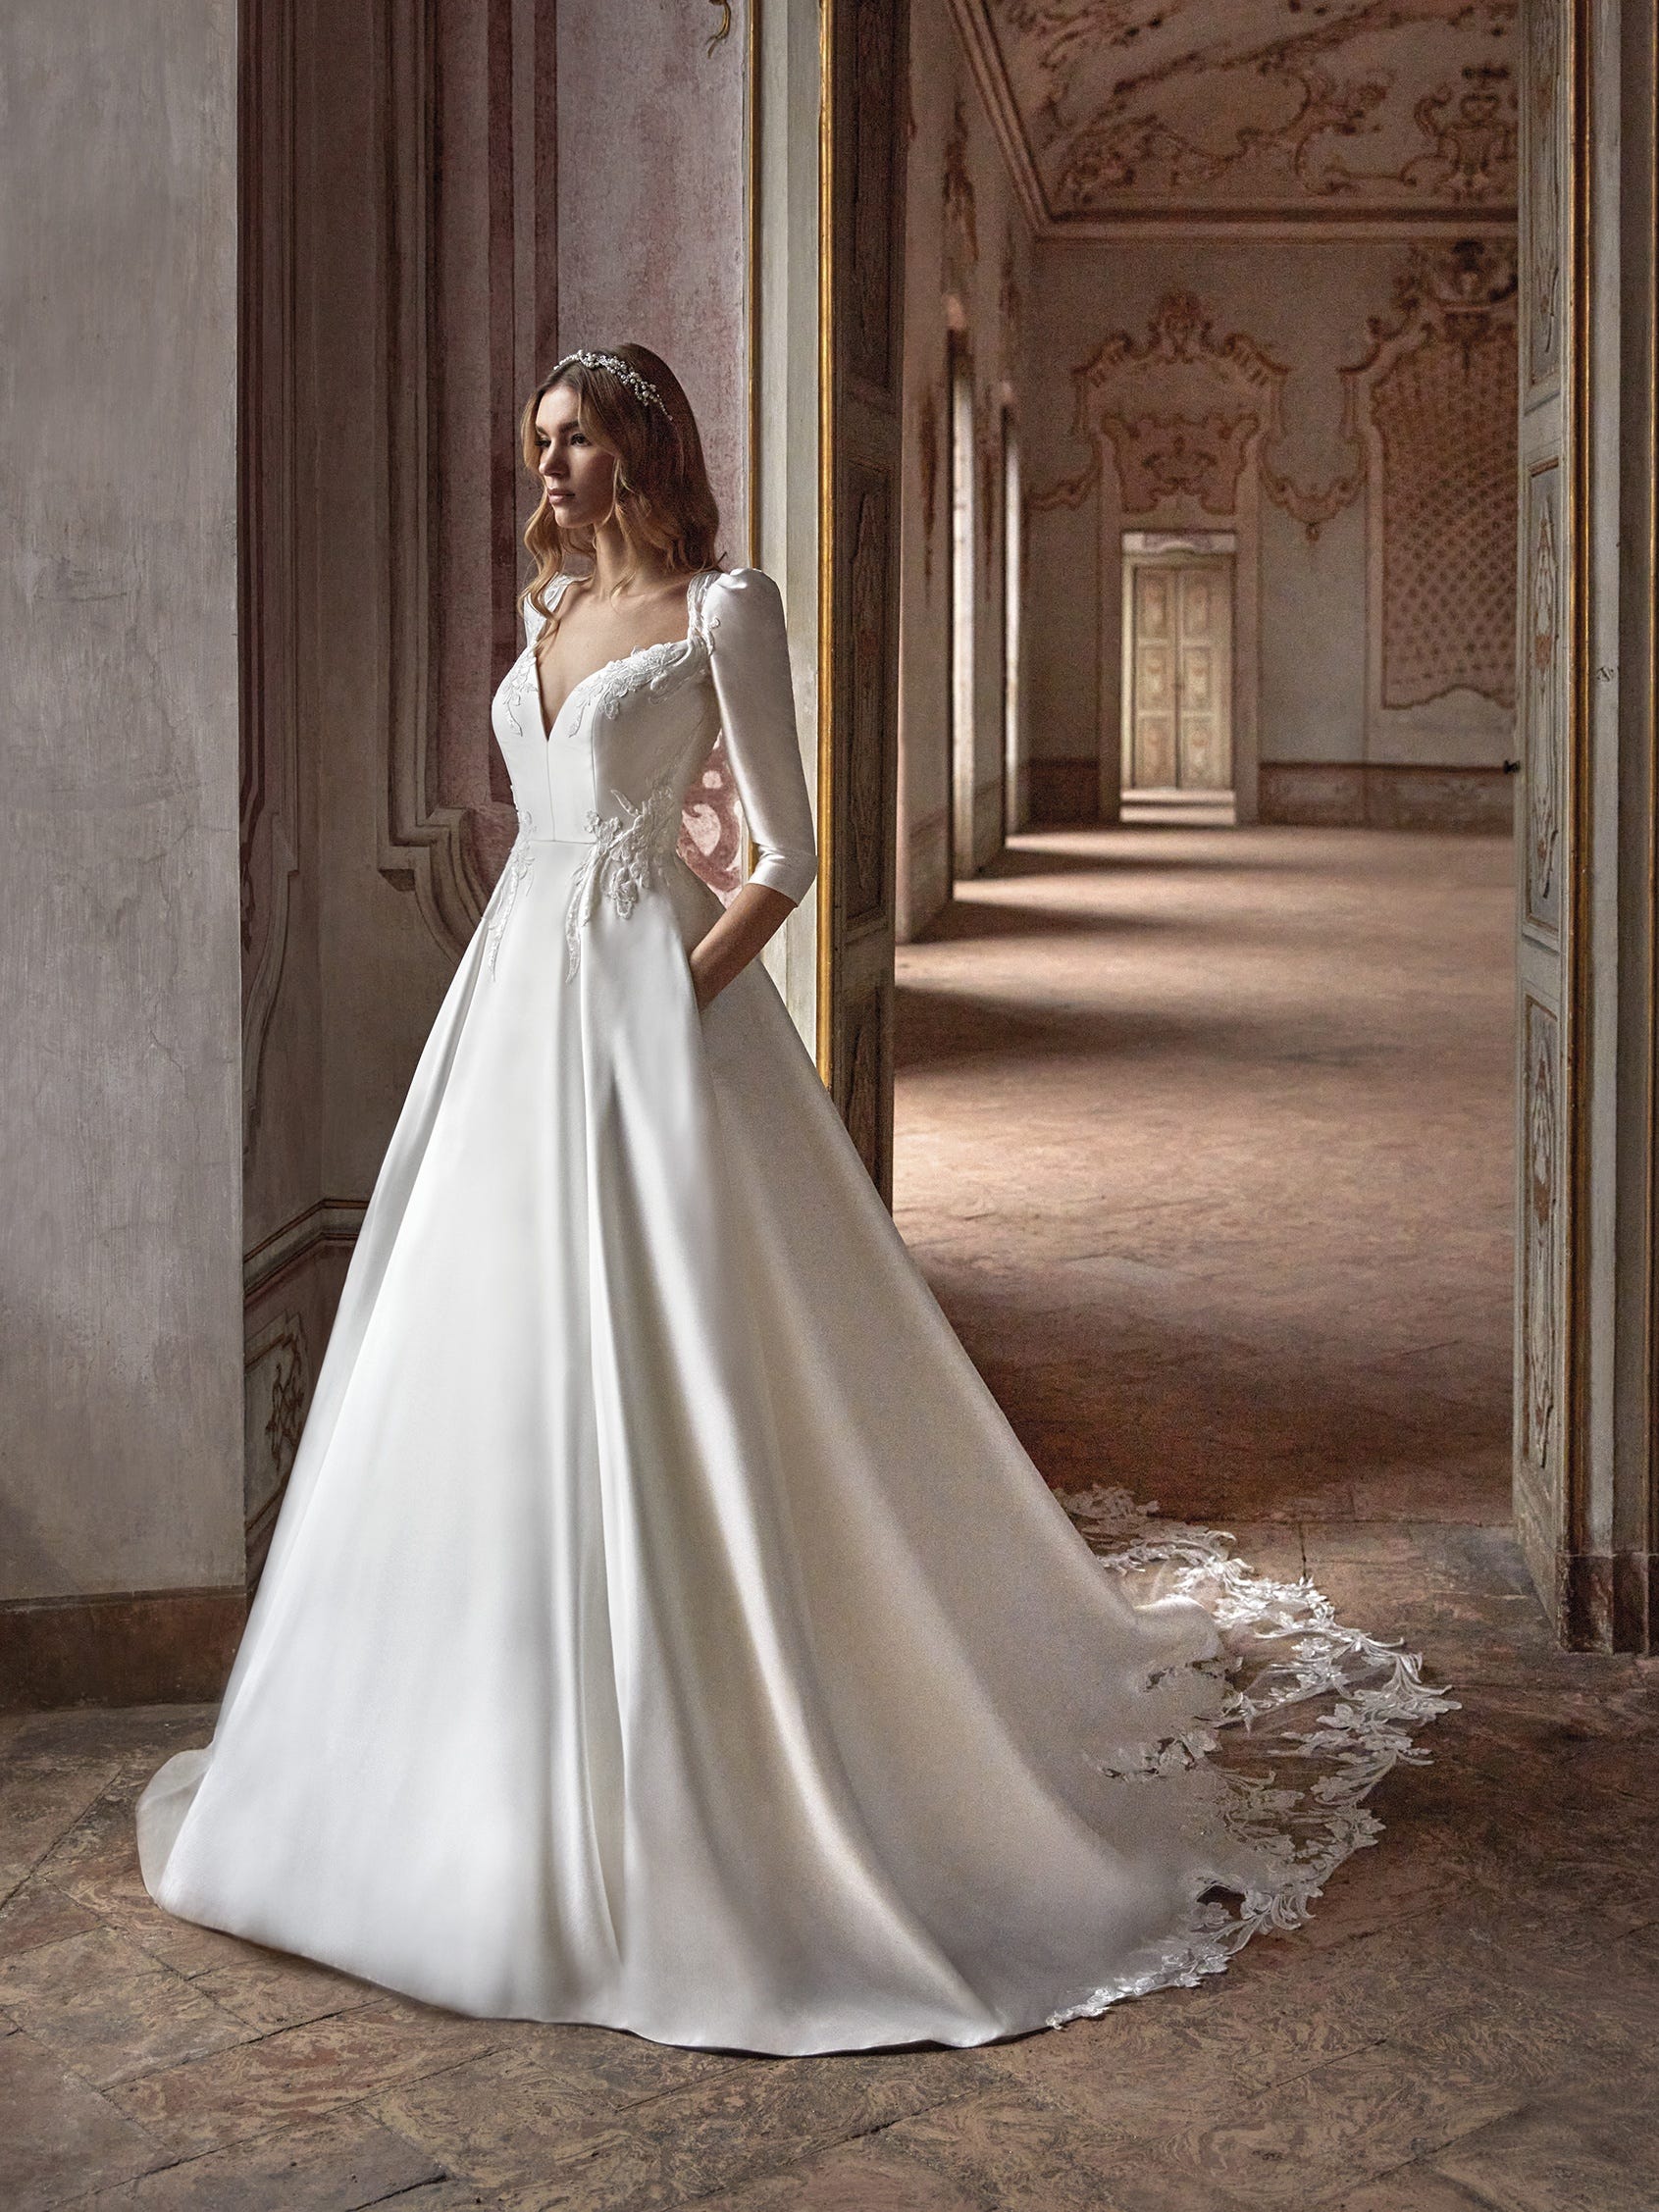 Princess style wedding gowns with bling and sleeves